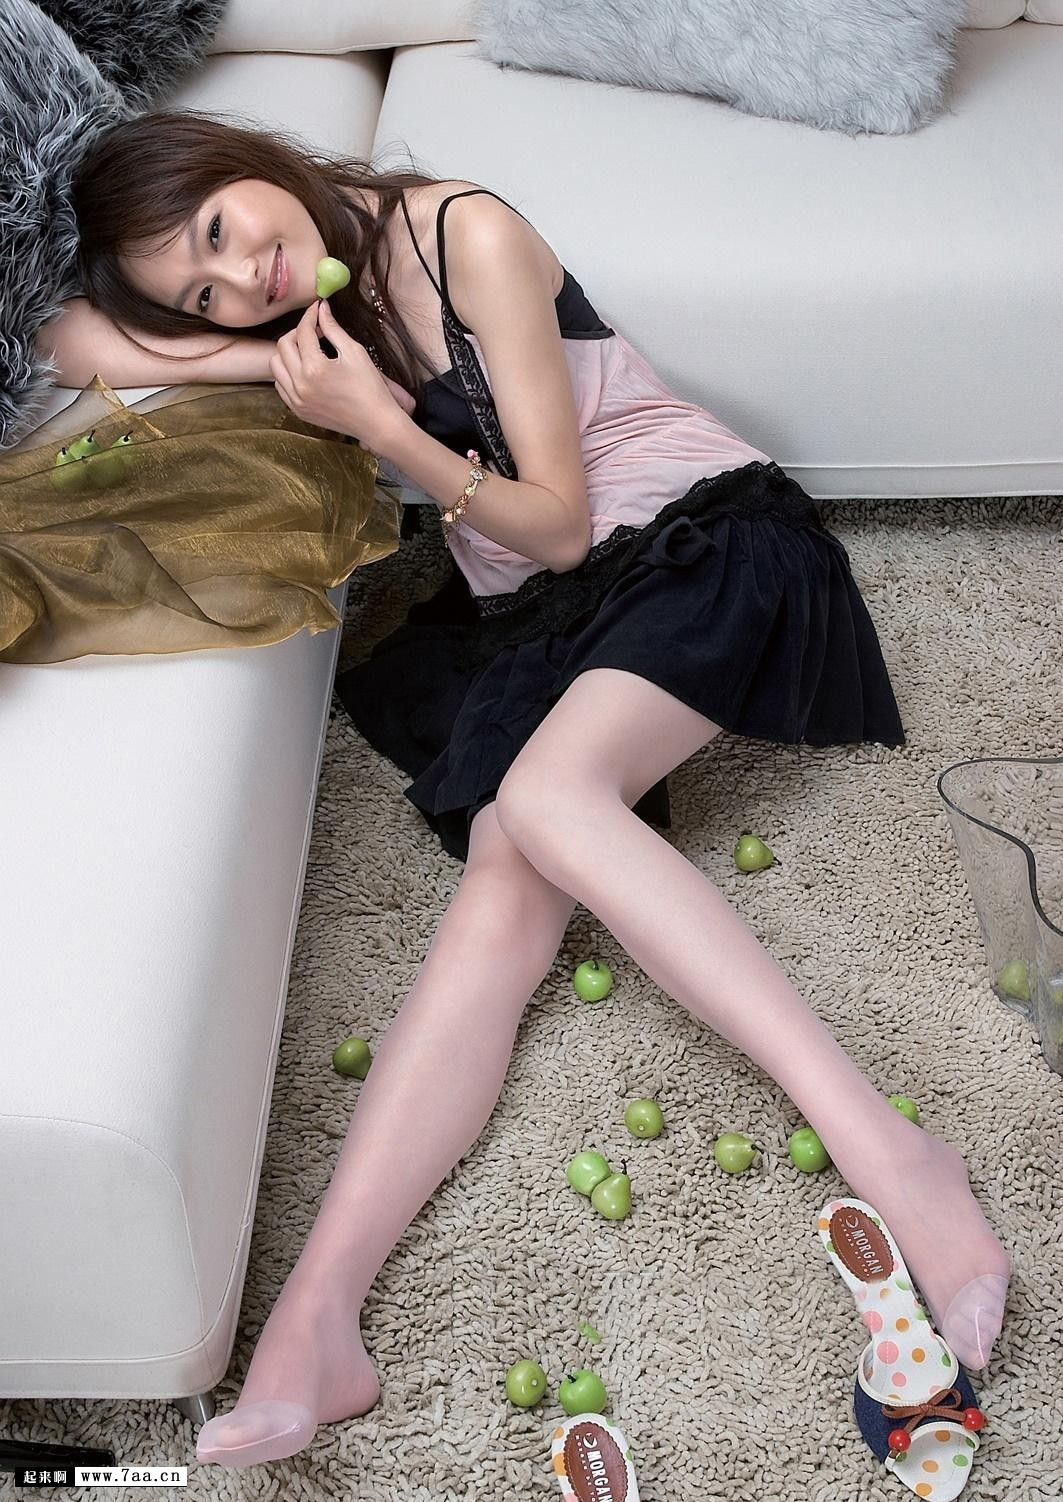 Pantyhose Models (Cute Japanese woman in pink tights)